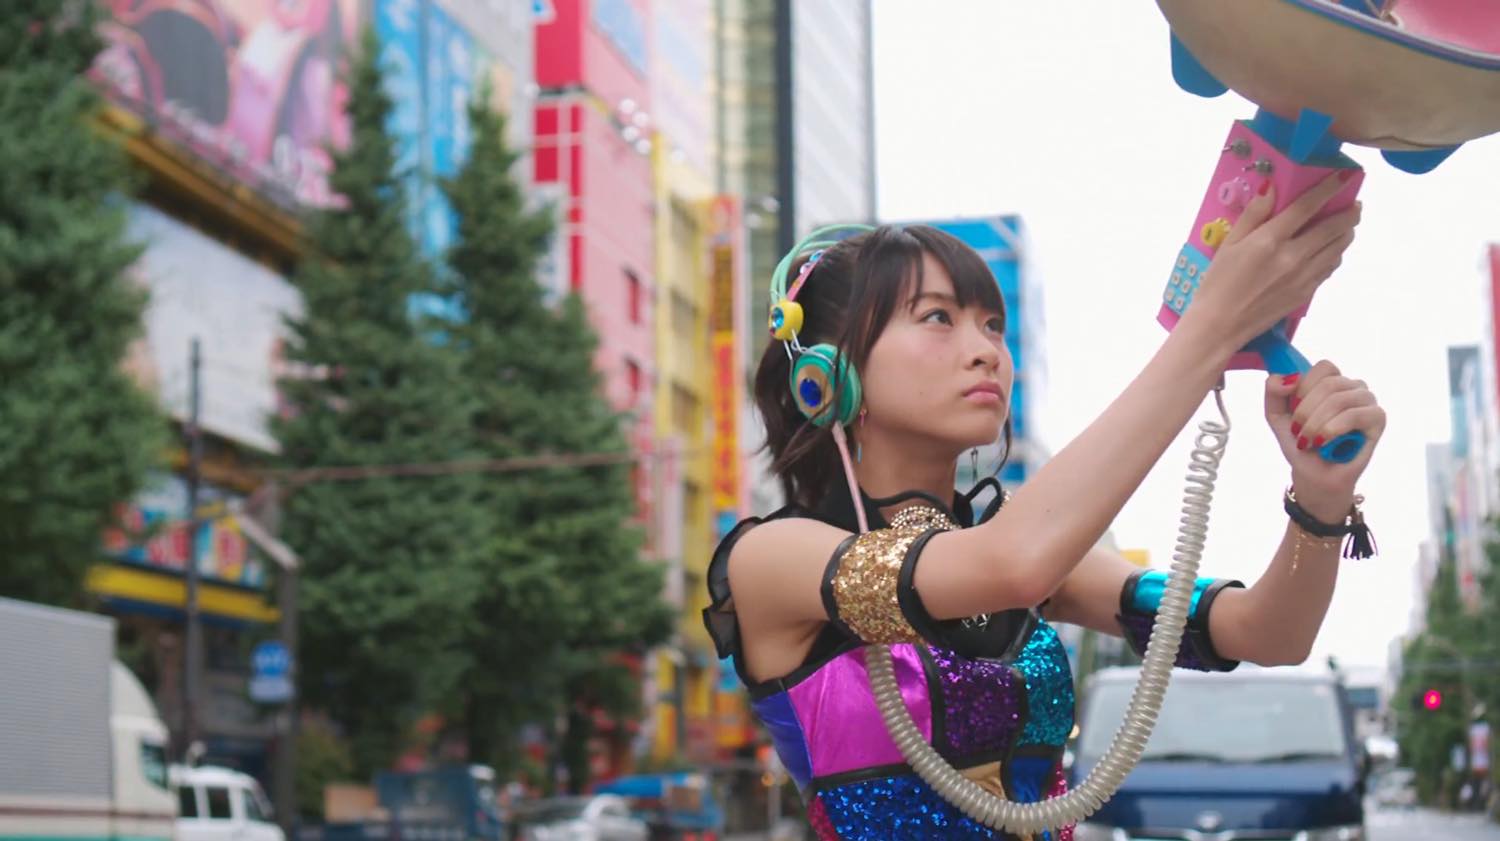 Thrills and Tears MIX in the MVs for “Saiko kayo” and “Yume Hitotsu” from HKT48’s 8th Single